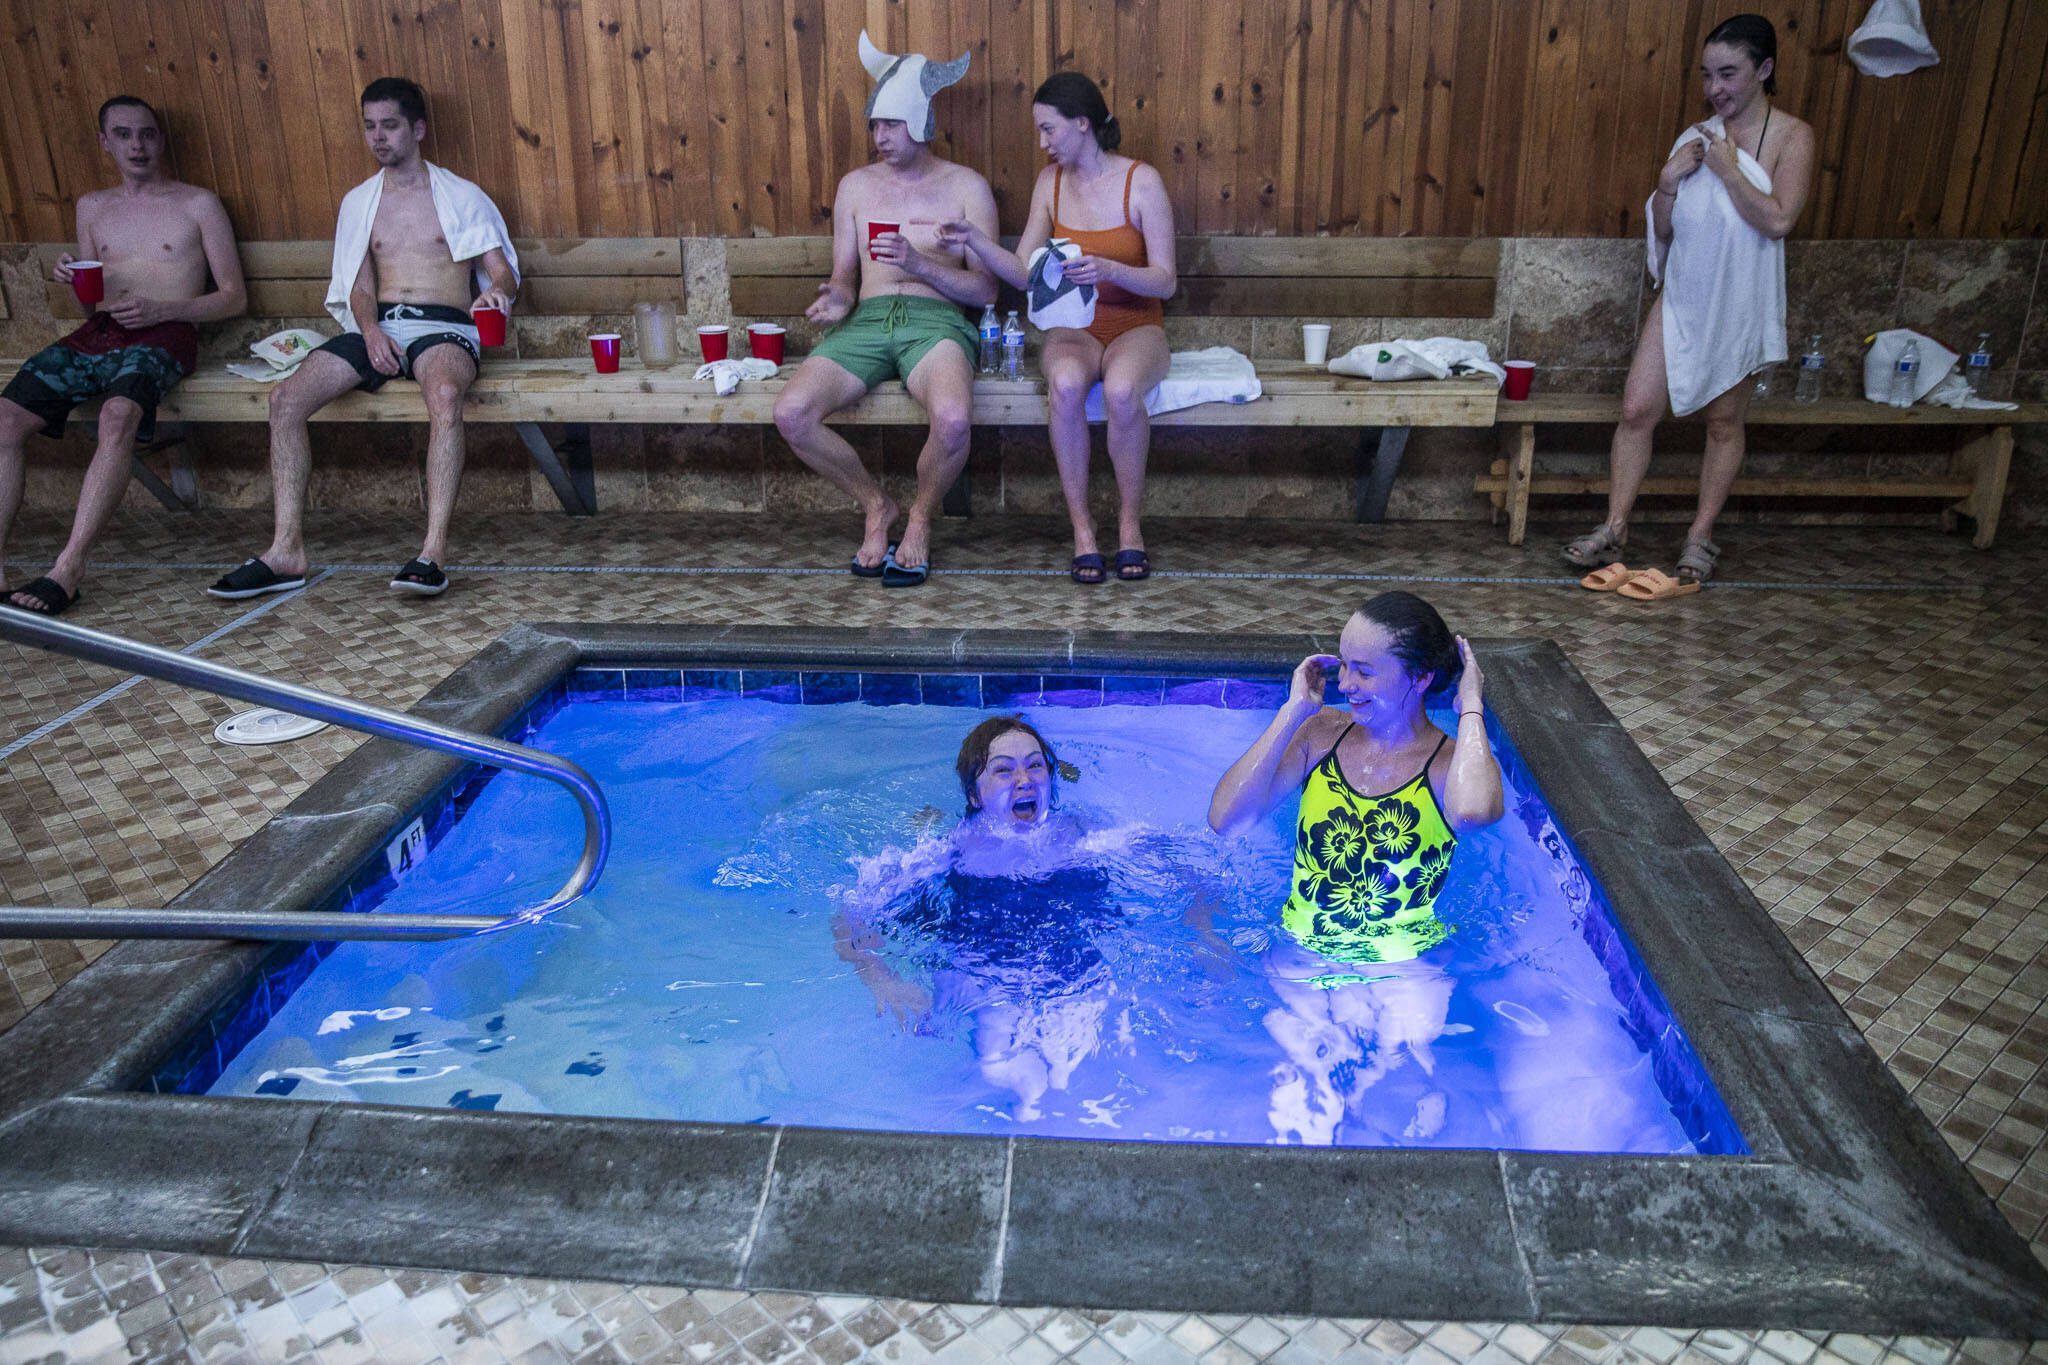 Nora Z., center, reacts while jumping into a cold pool after getting out of the hot sauna at Banya in Everett. (Olivia Vanni / The Herald)